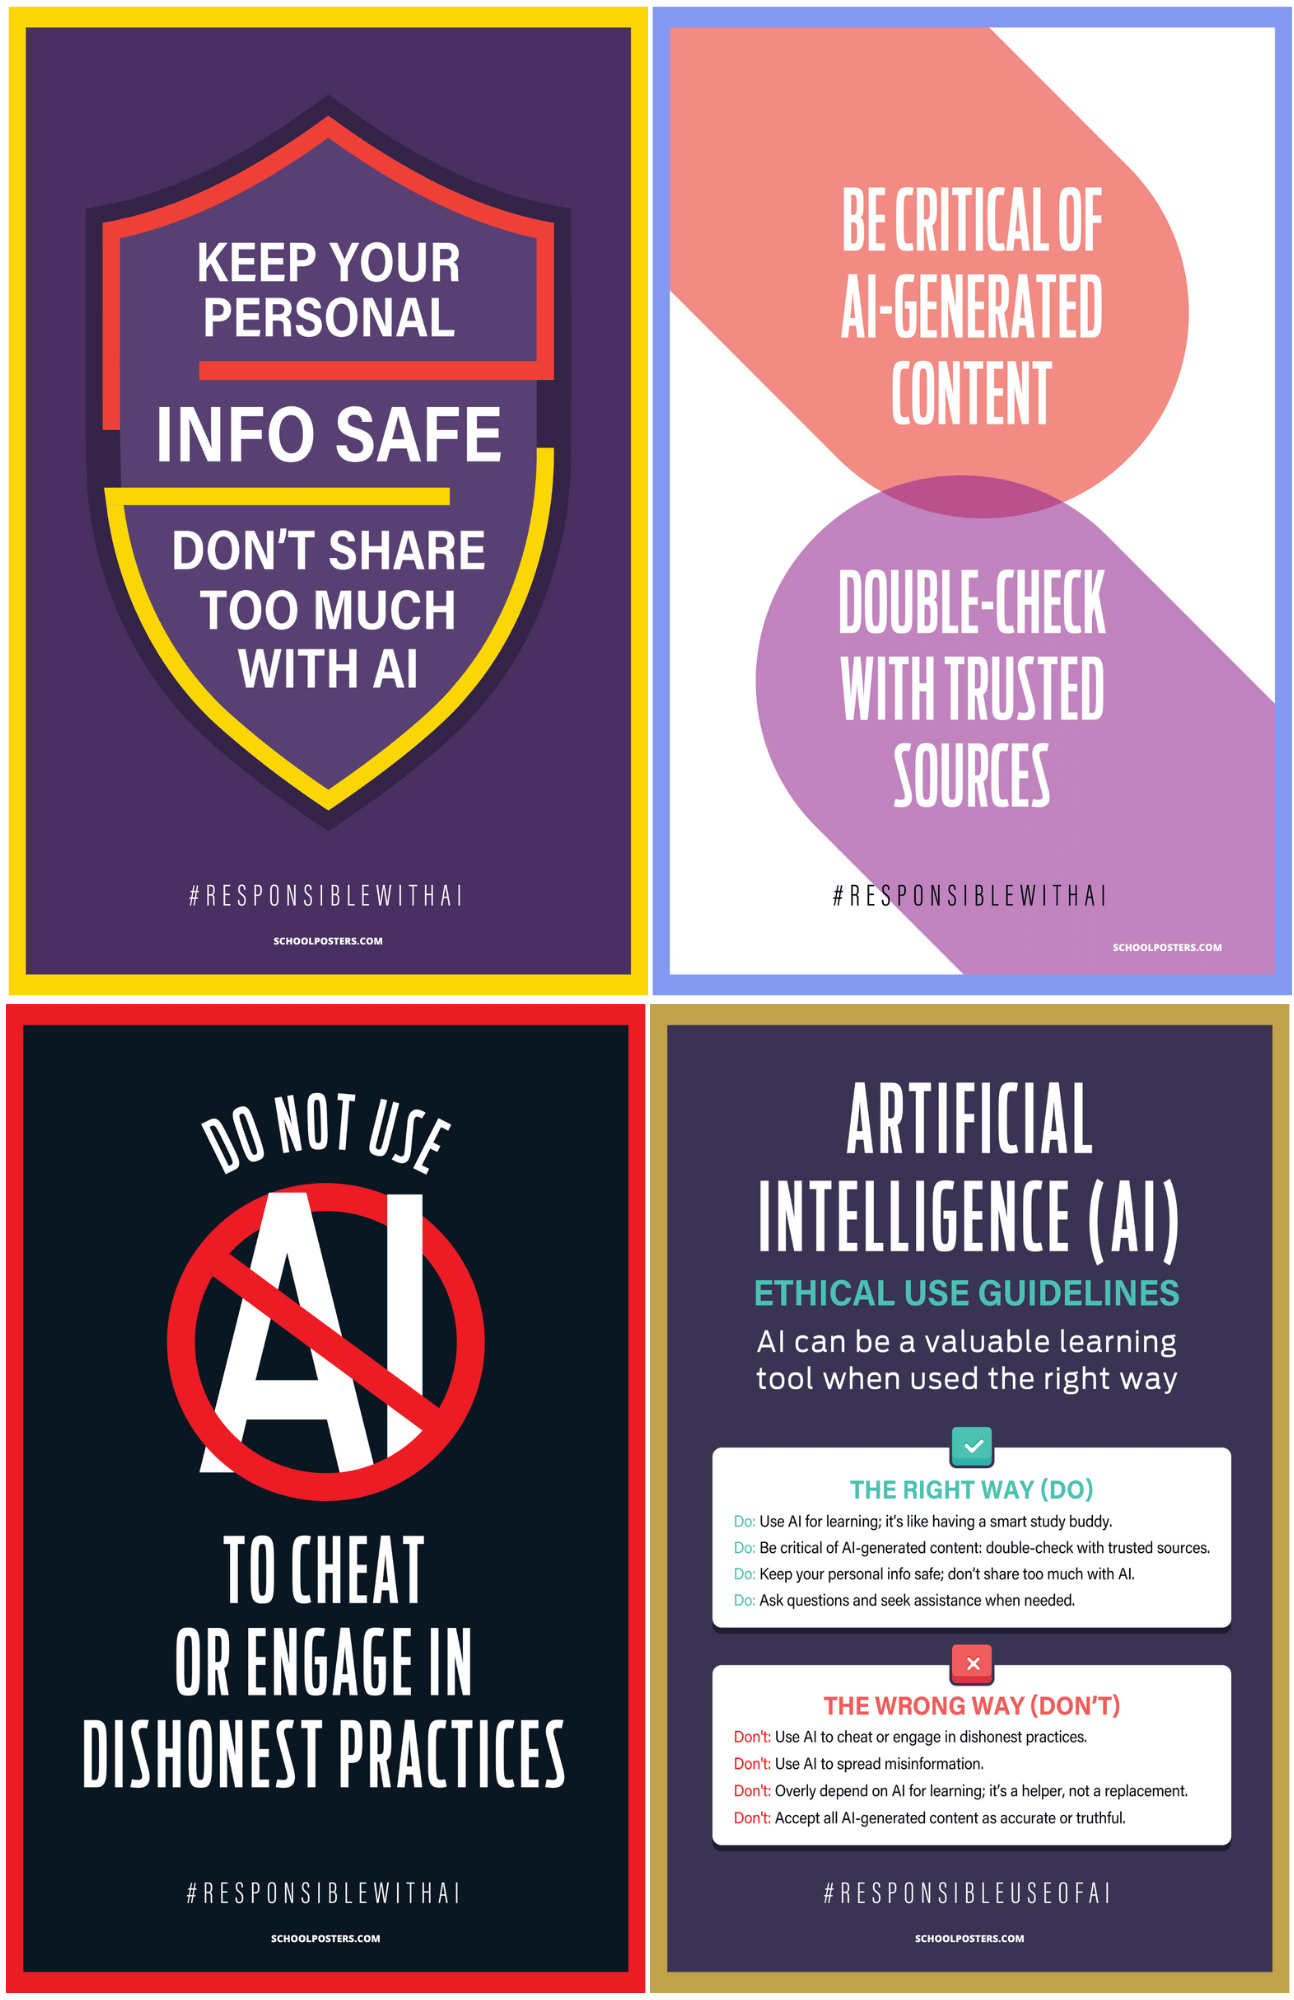 Artificial Intelligence Poster Package (Set of 8)